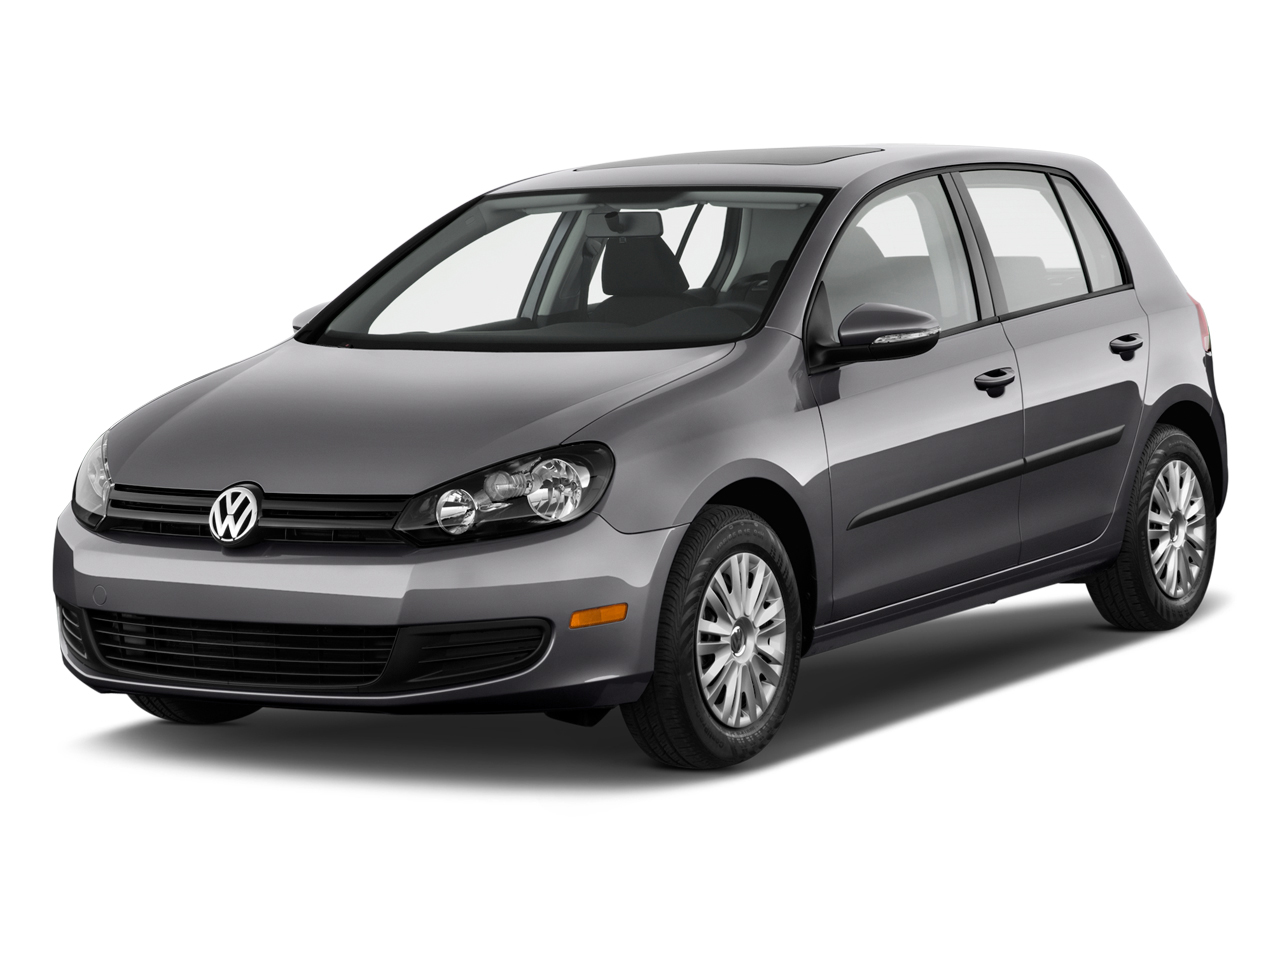 2012 Volkswagen Golf (VW) Review, Ratings, and Photos The Car Connection